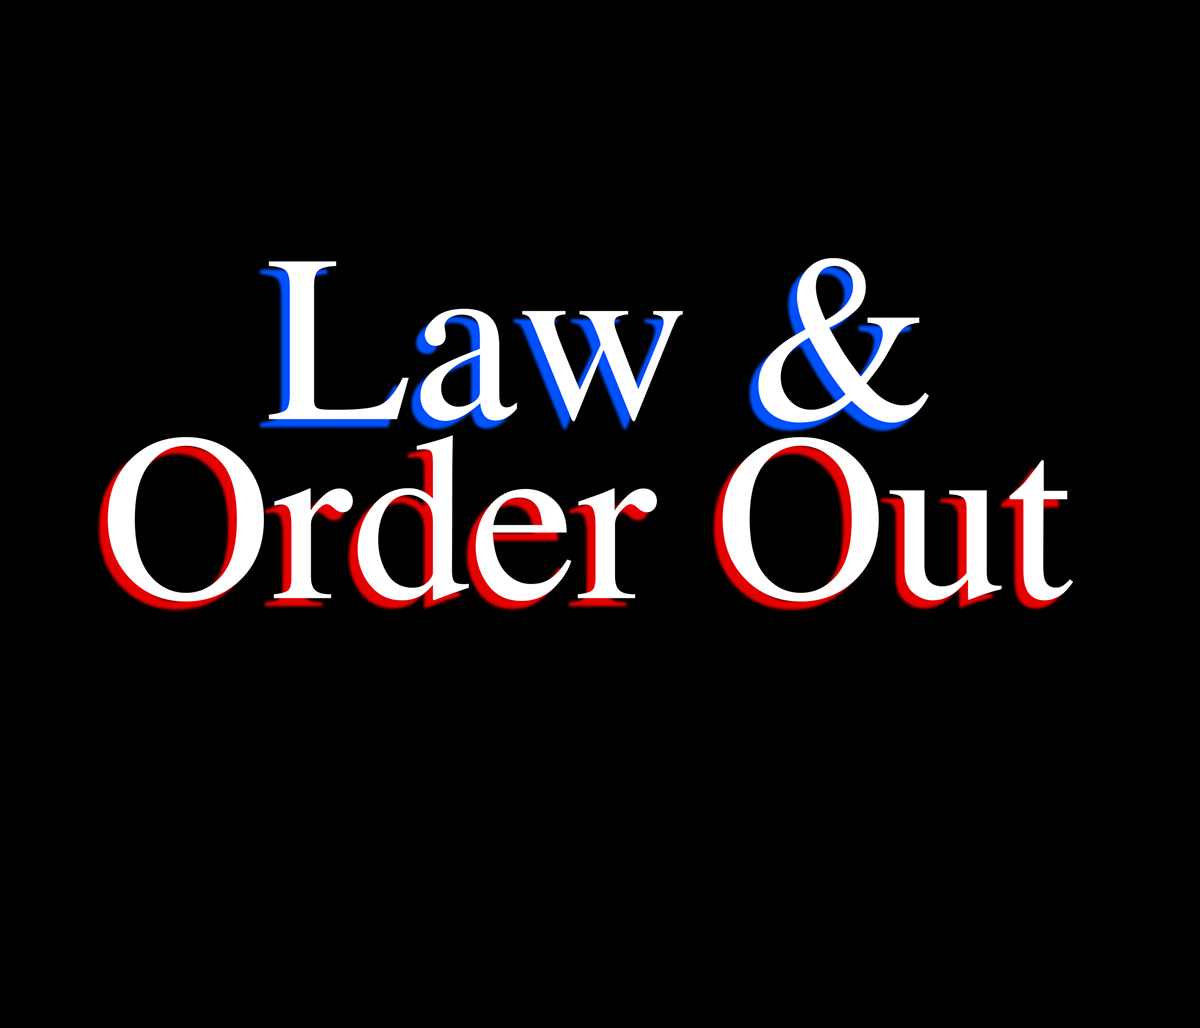 law and order Order out